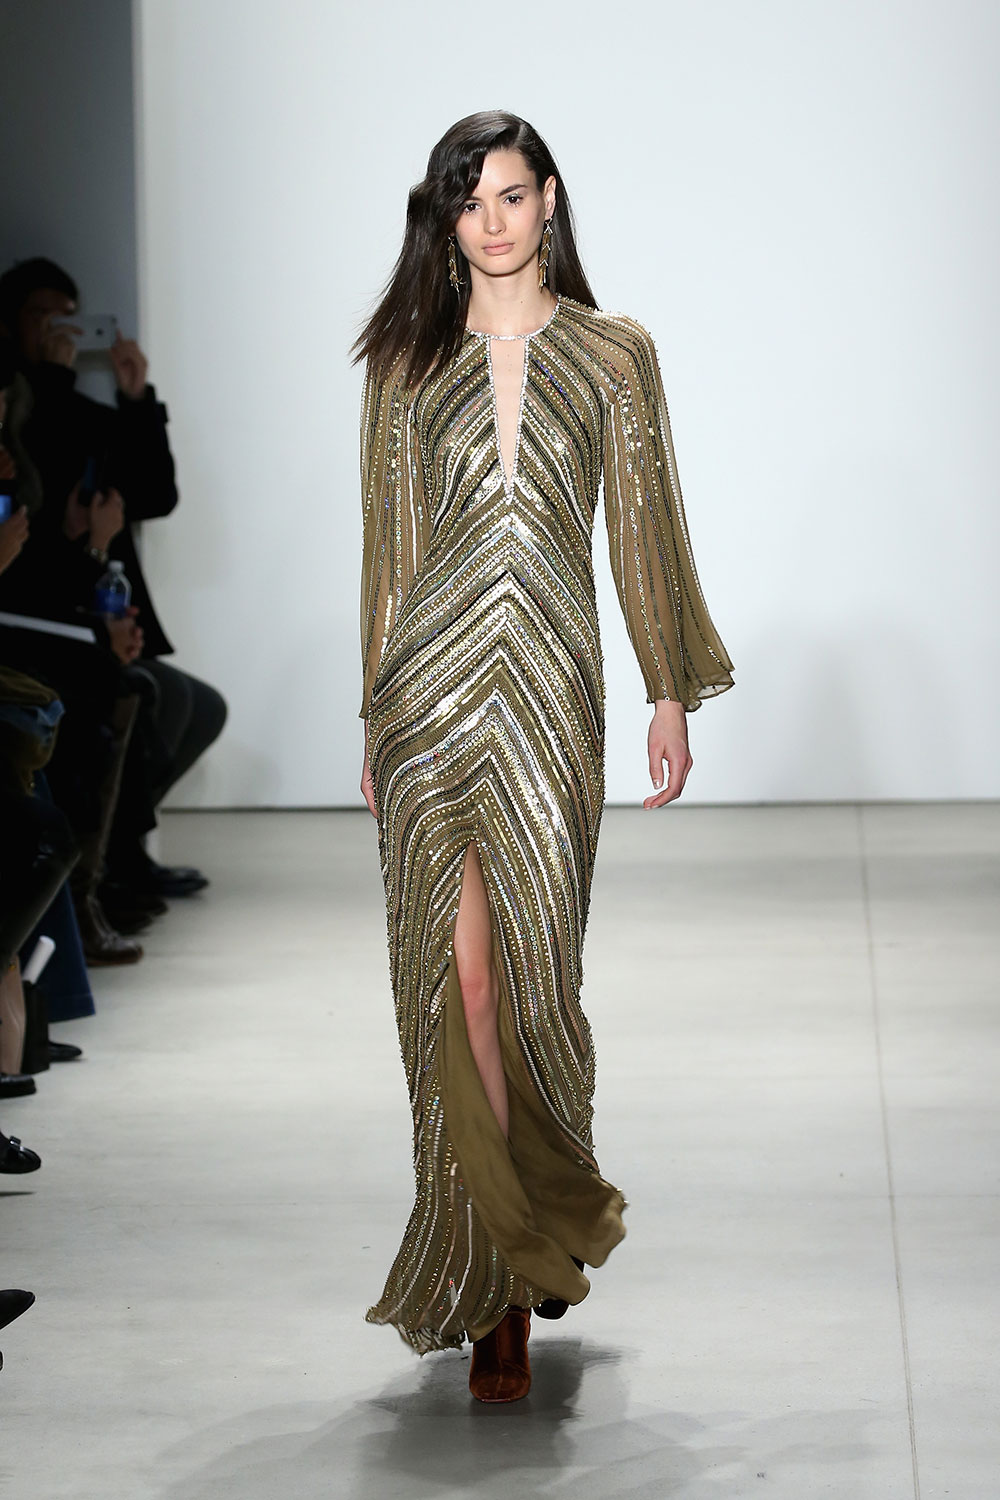 Jenny Packham SS16 gold long-sleeved gown